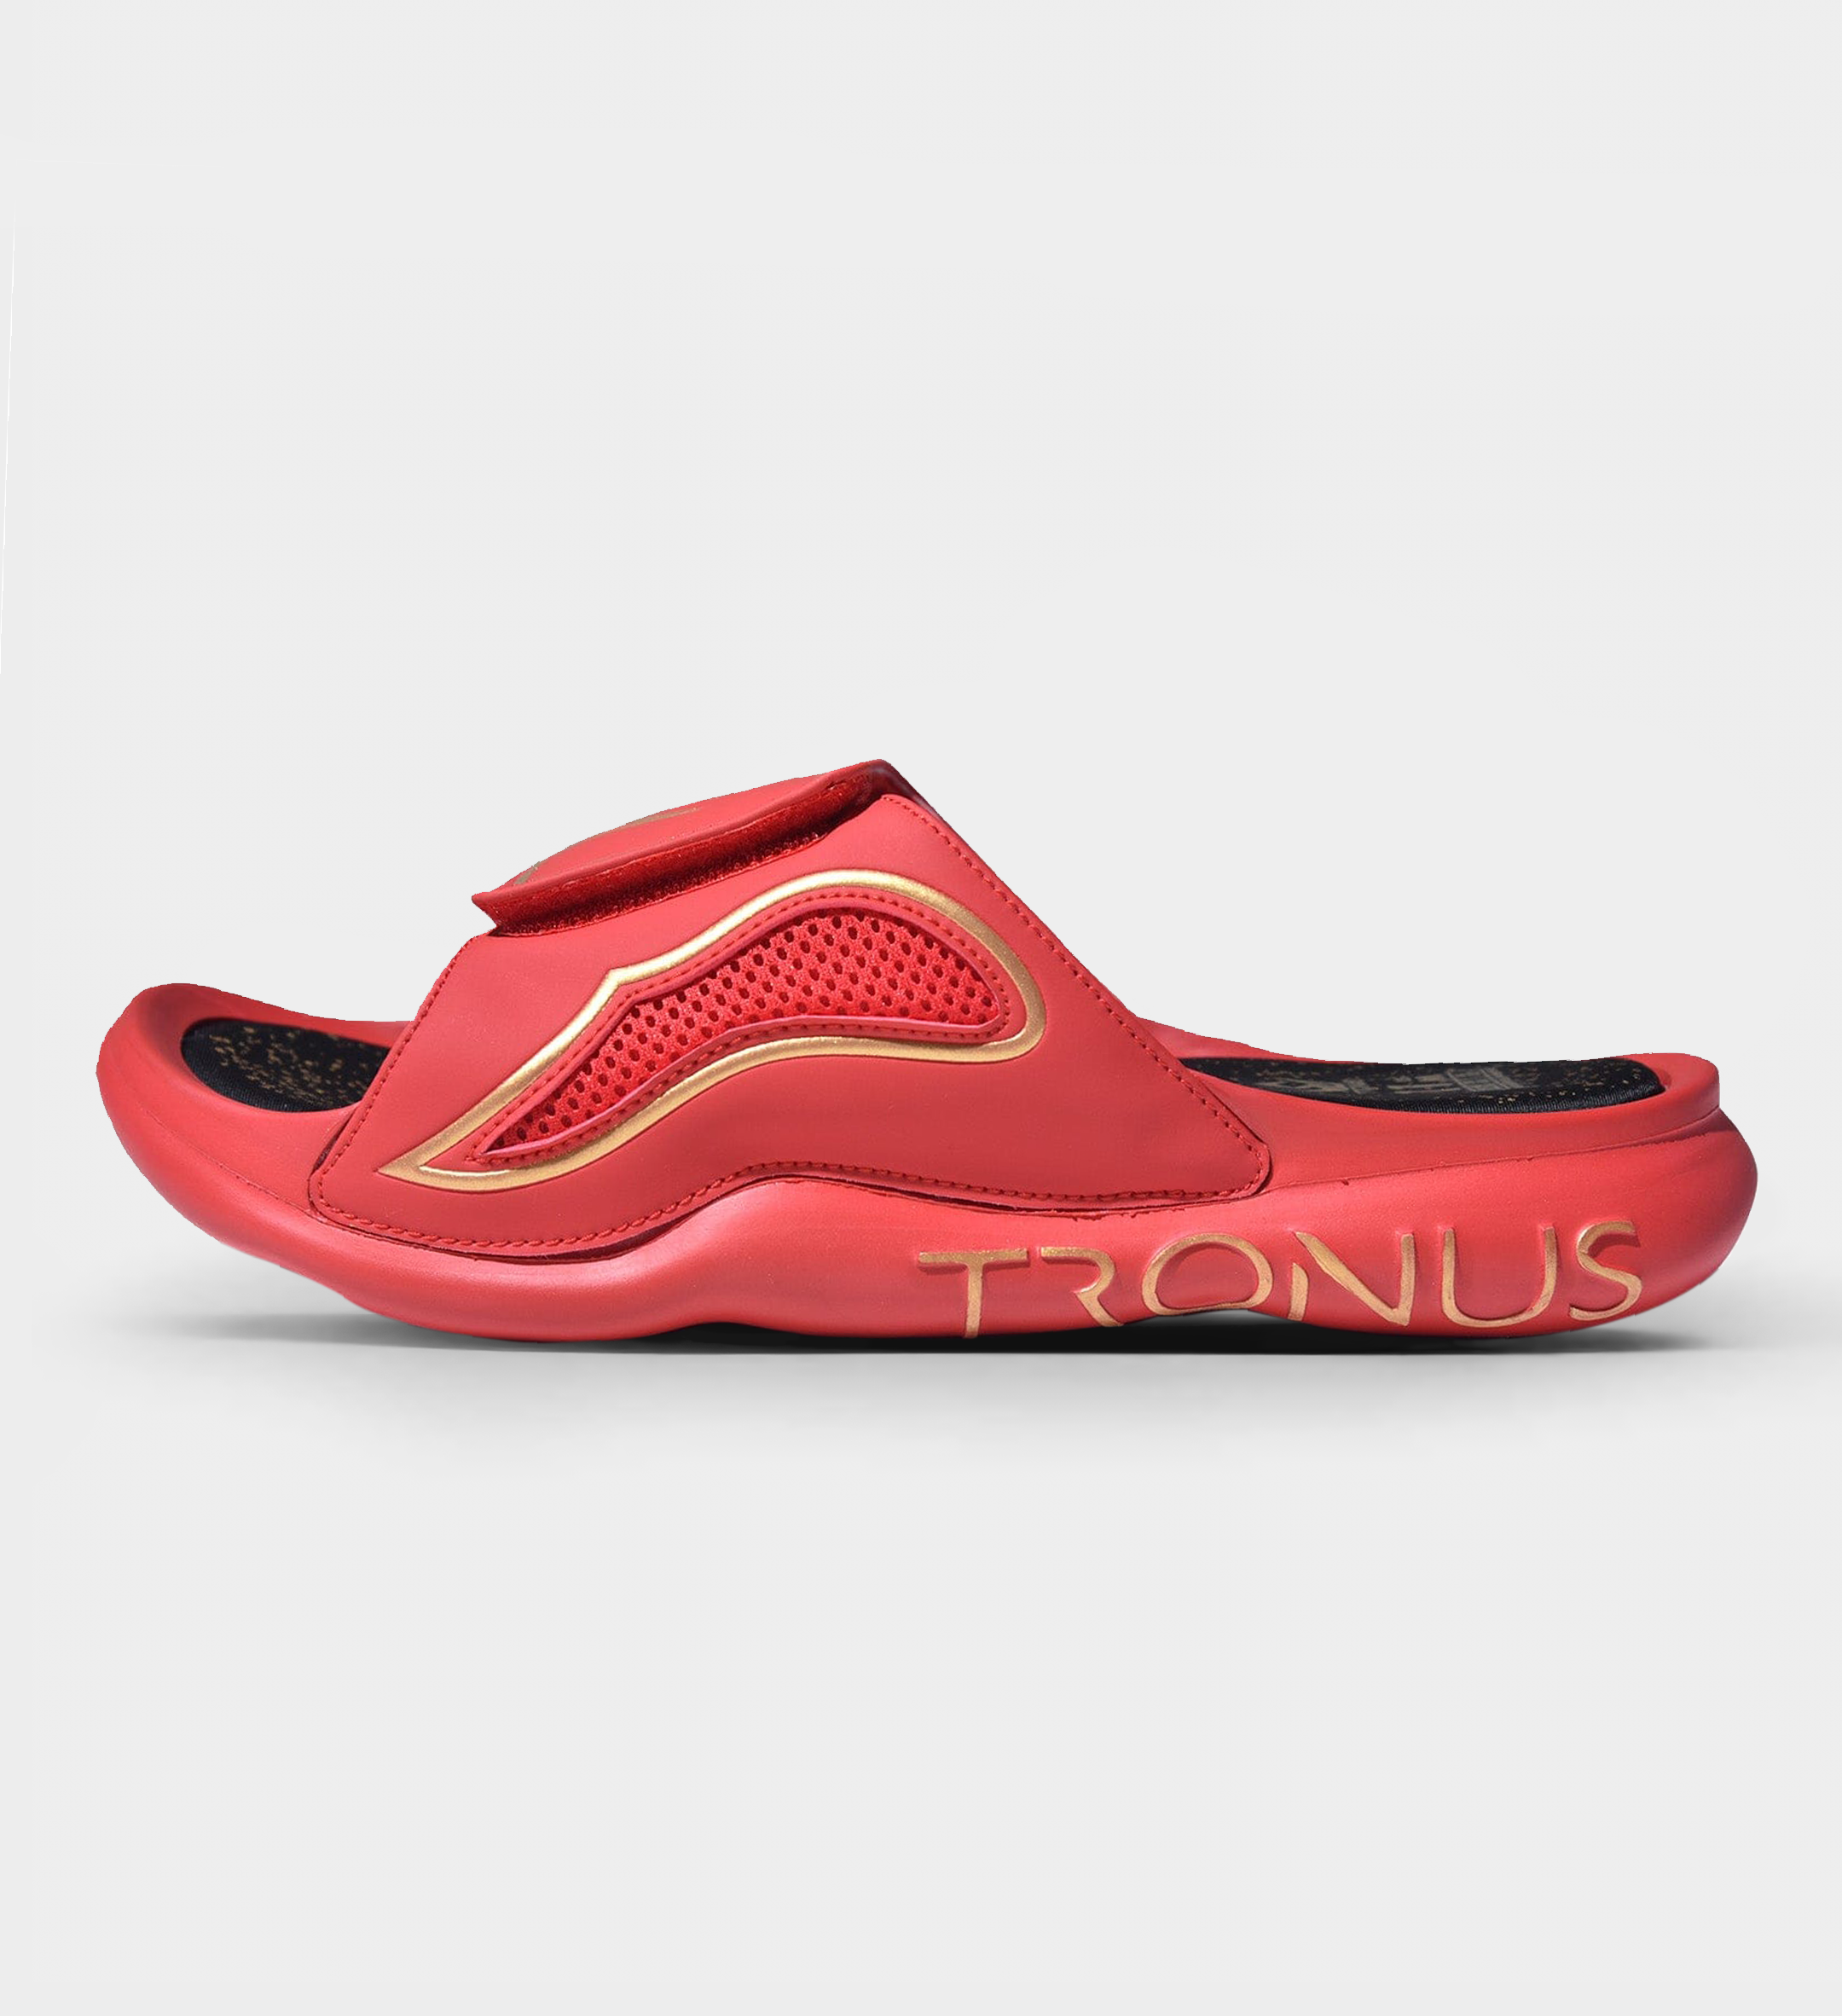 tronus-prod-imgs-red.png